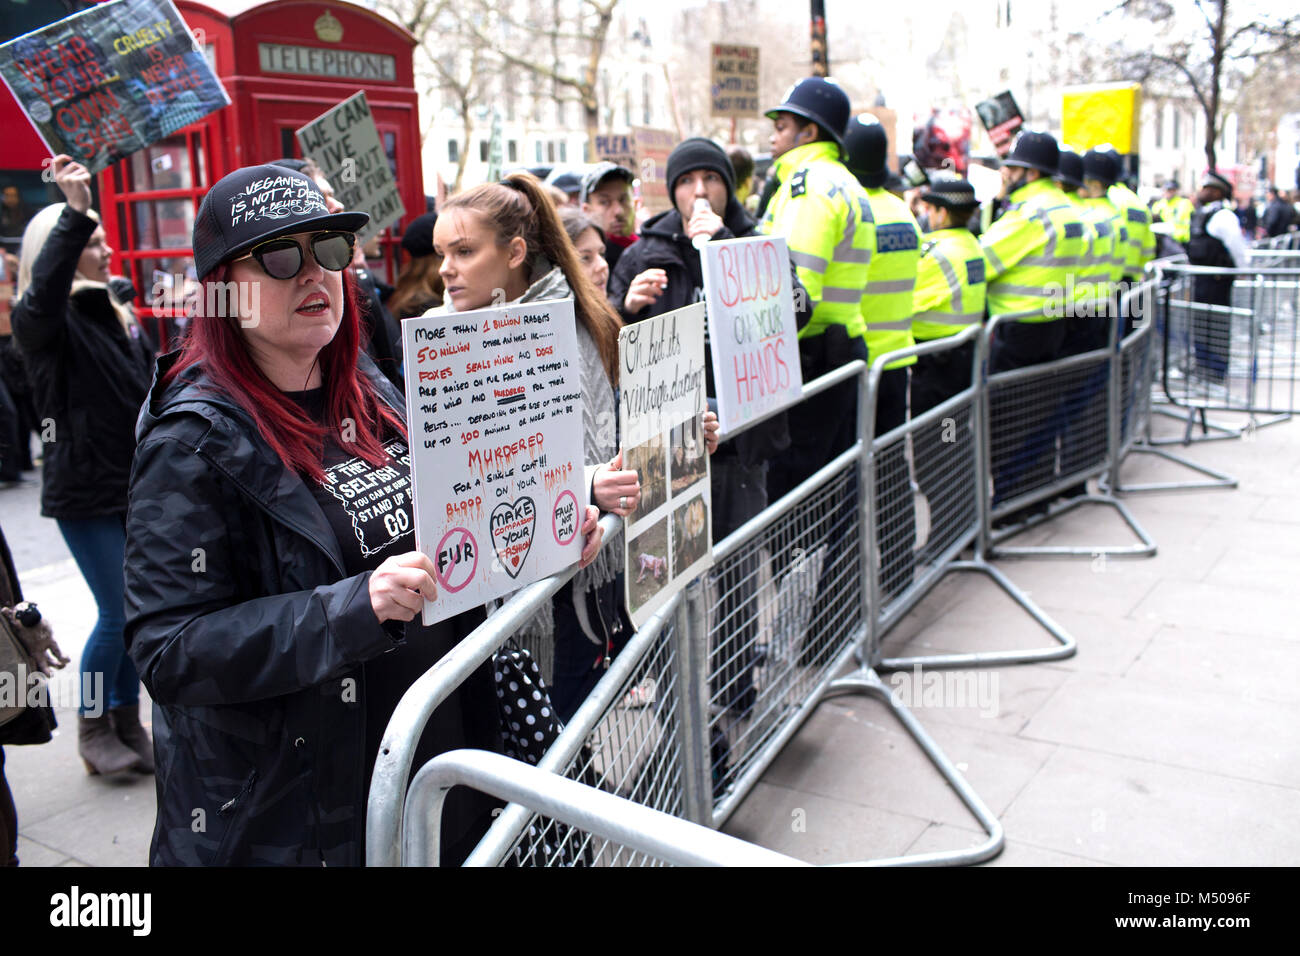 London, UK. 17th February 2018, Animal rights activists protest against the use of animal fur in the fashion industry outside of the venue for London Fashion Week. Mariusz Goslicki/Alamy Live News Stock Photo